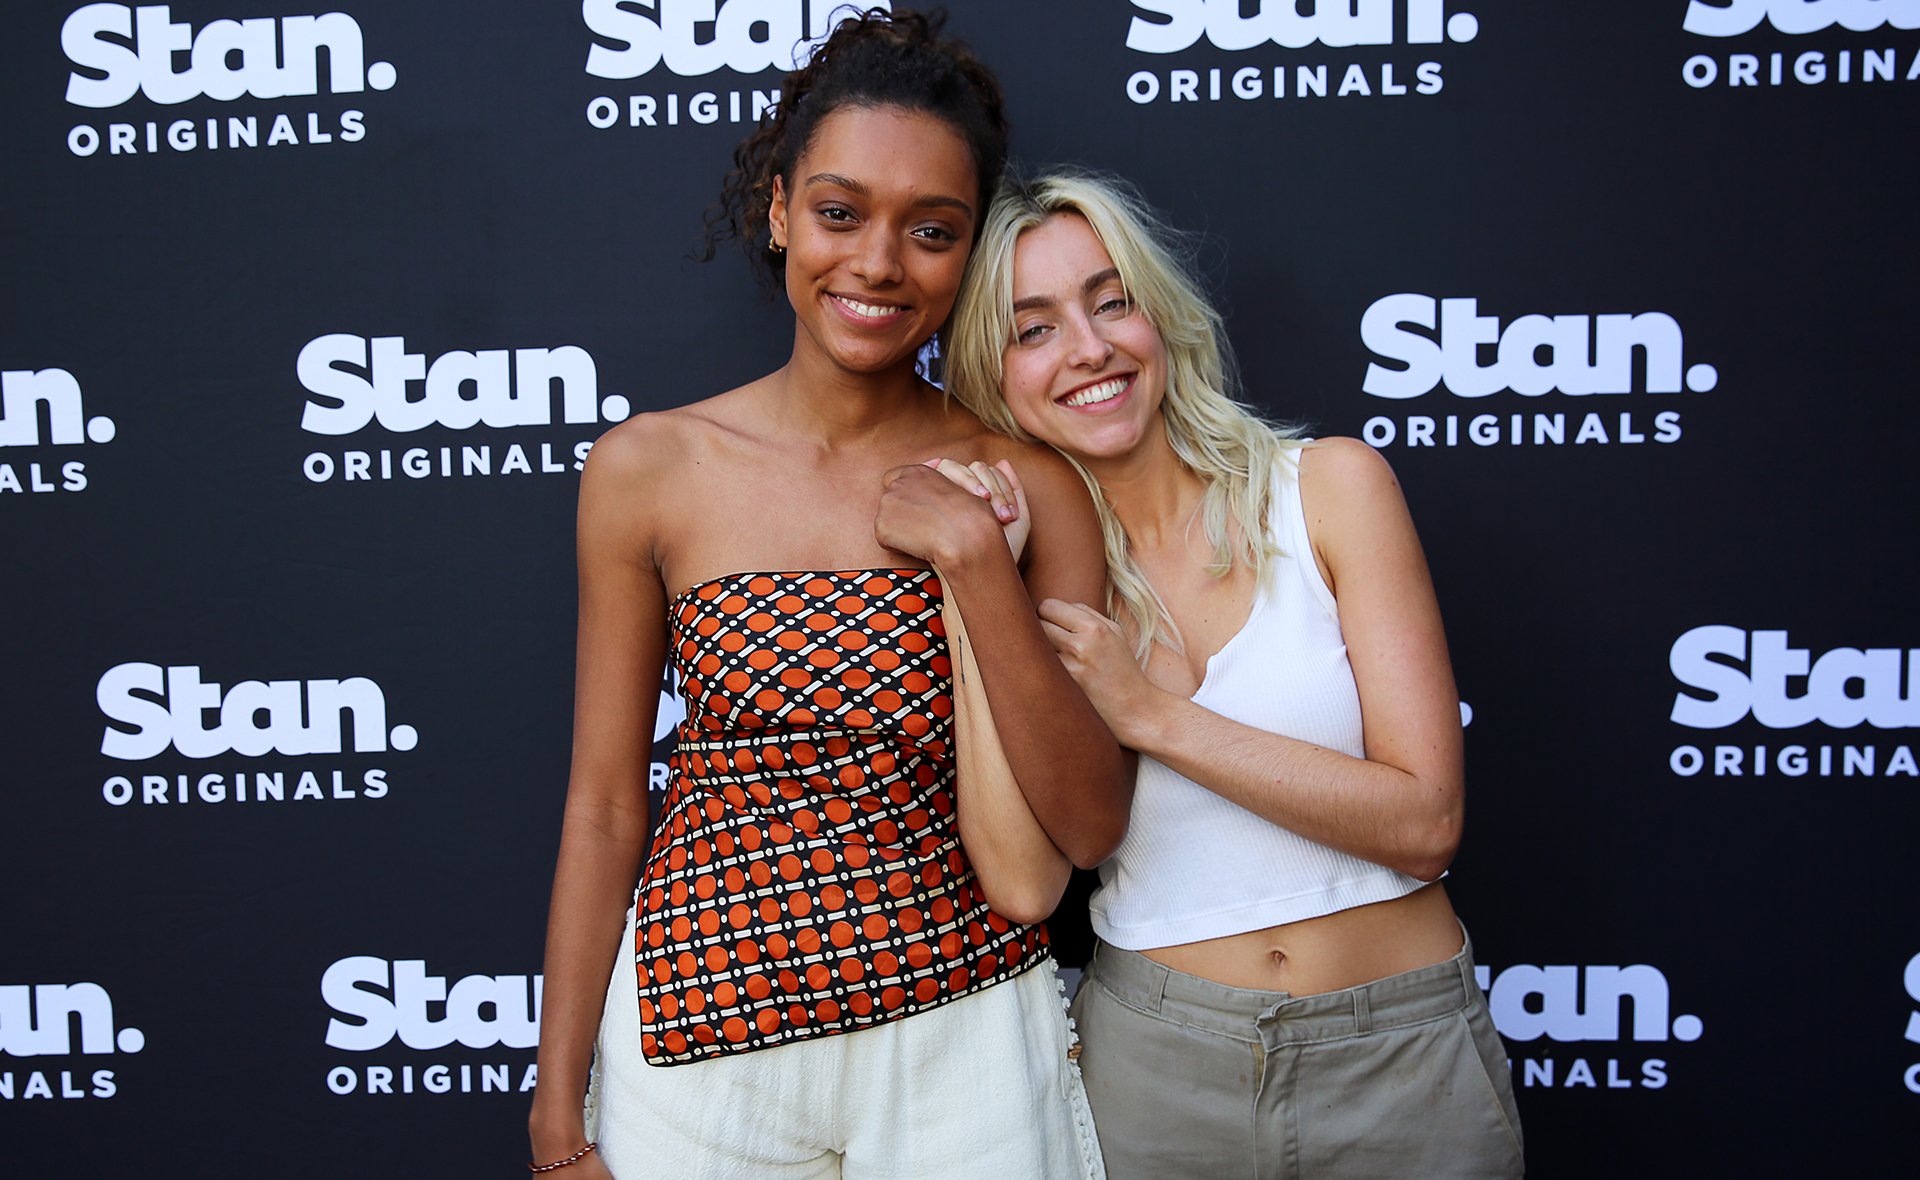 EXCLUSIVE: The stars of Stan’s Eden Bebe Bettencourt and Sophie Wilde reveal why sex positivity was integral to the show